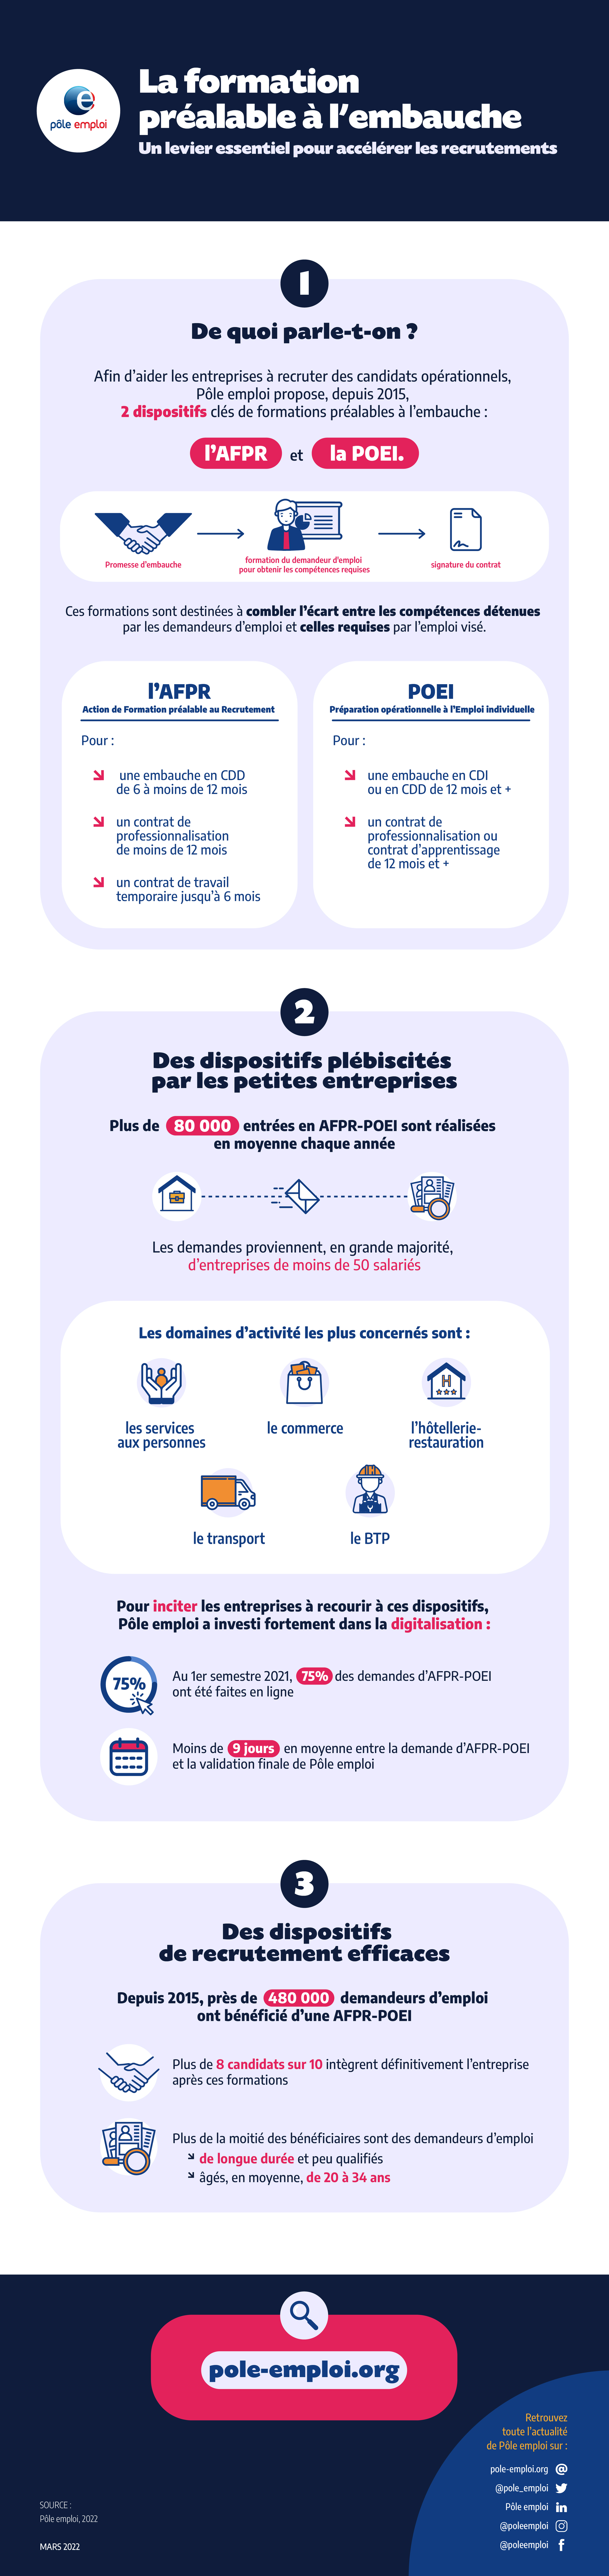 PoleEmploi_Infographie2022_Formationprealableal'embauche_V1 (2).jpg (PoleEmploi_Infographi...